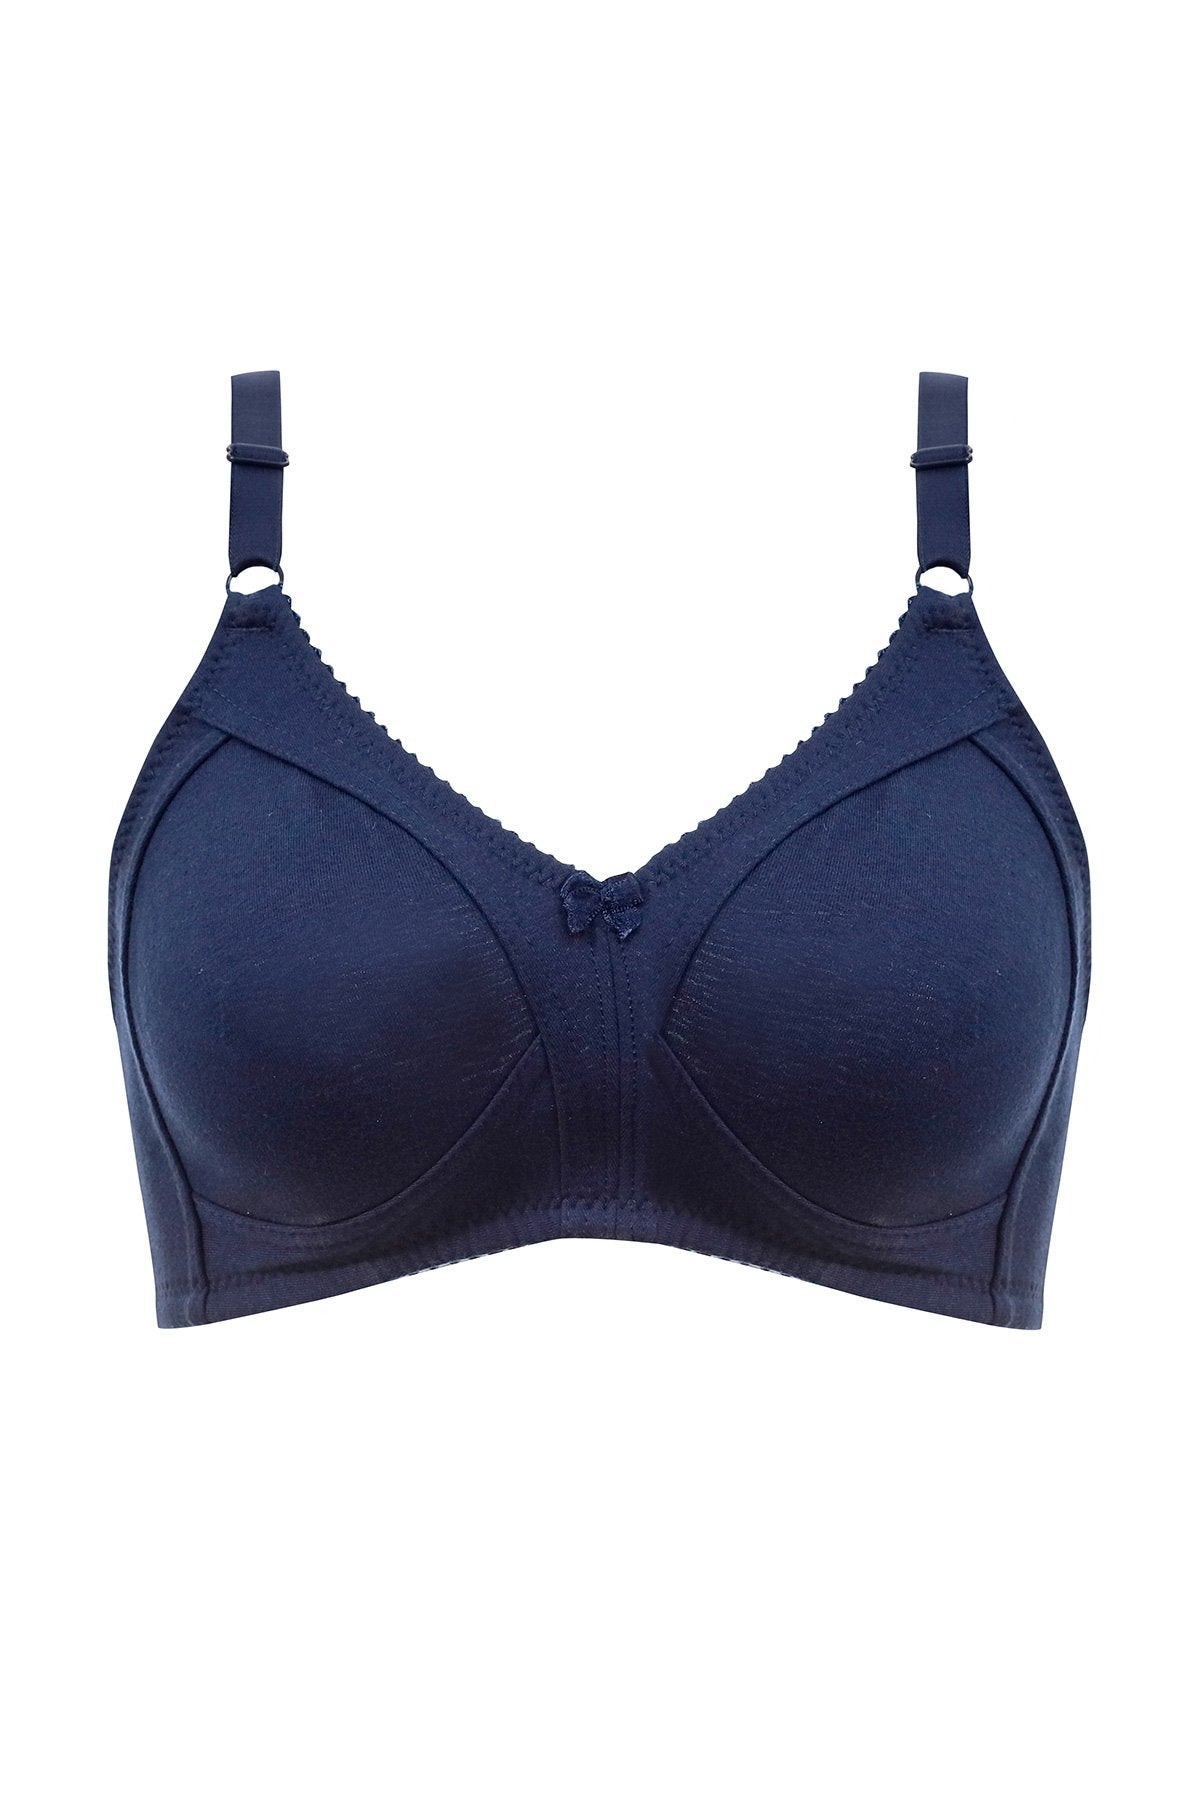 BLS - Clara Non Wired And Non Padded Cotton Bra - Navy Blue